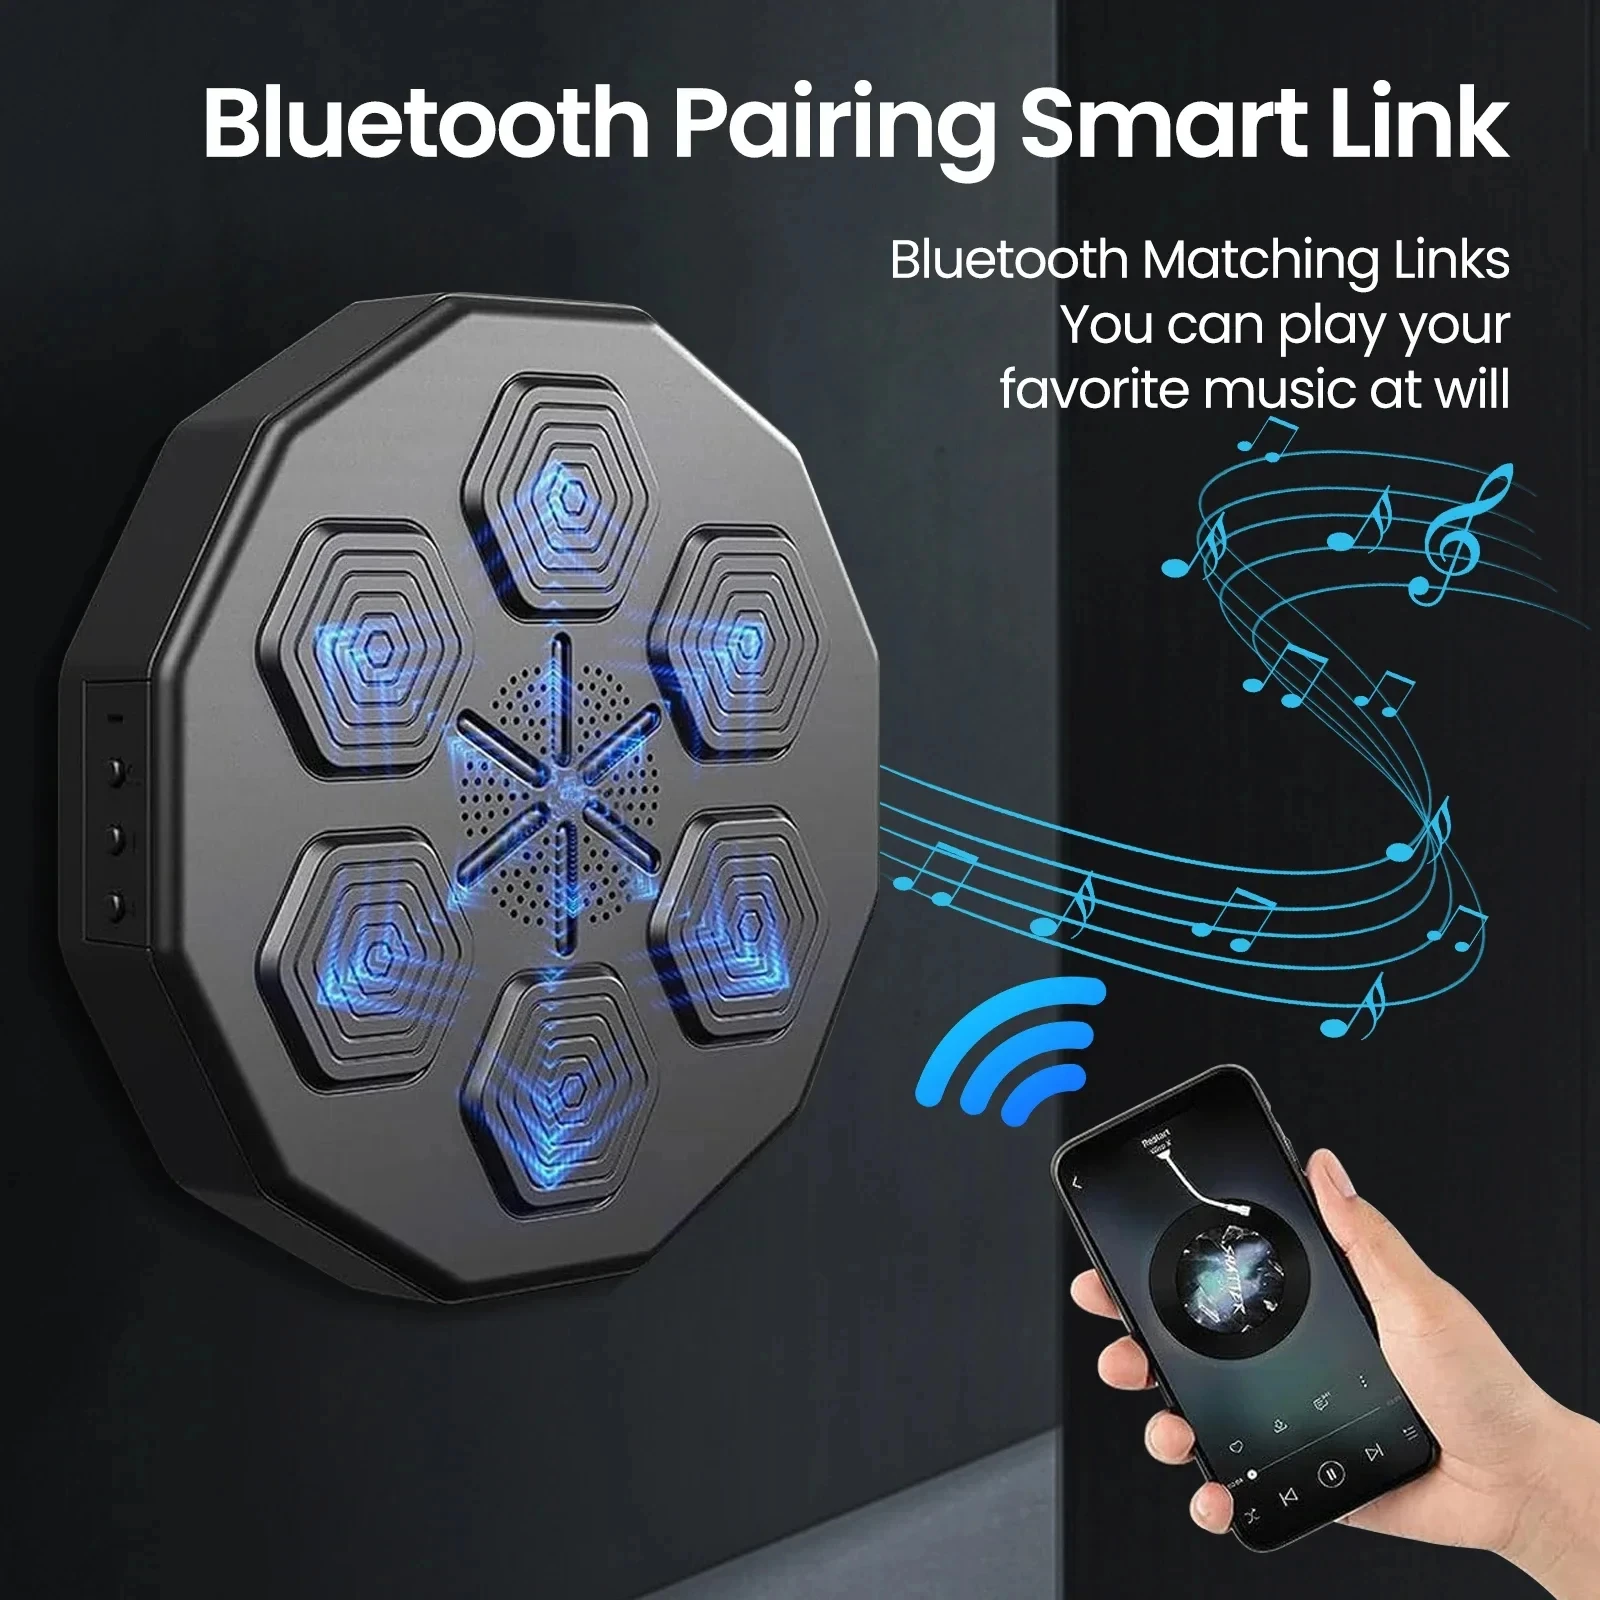 Untica Music Boxing Machine, Smart Bluetooth Connection Boxing